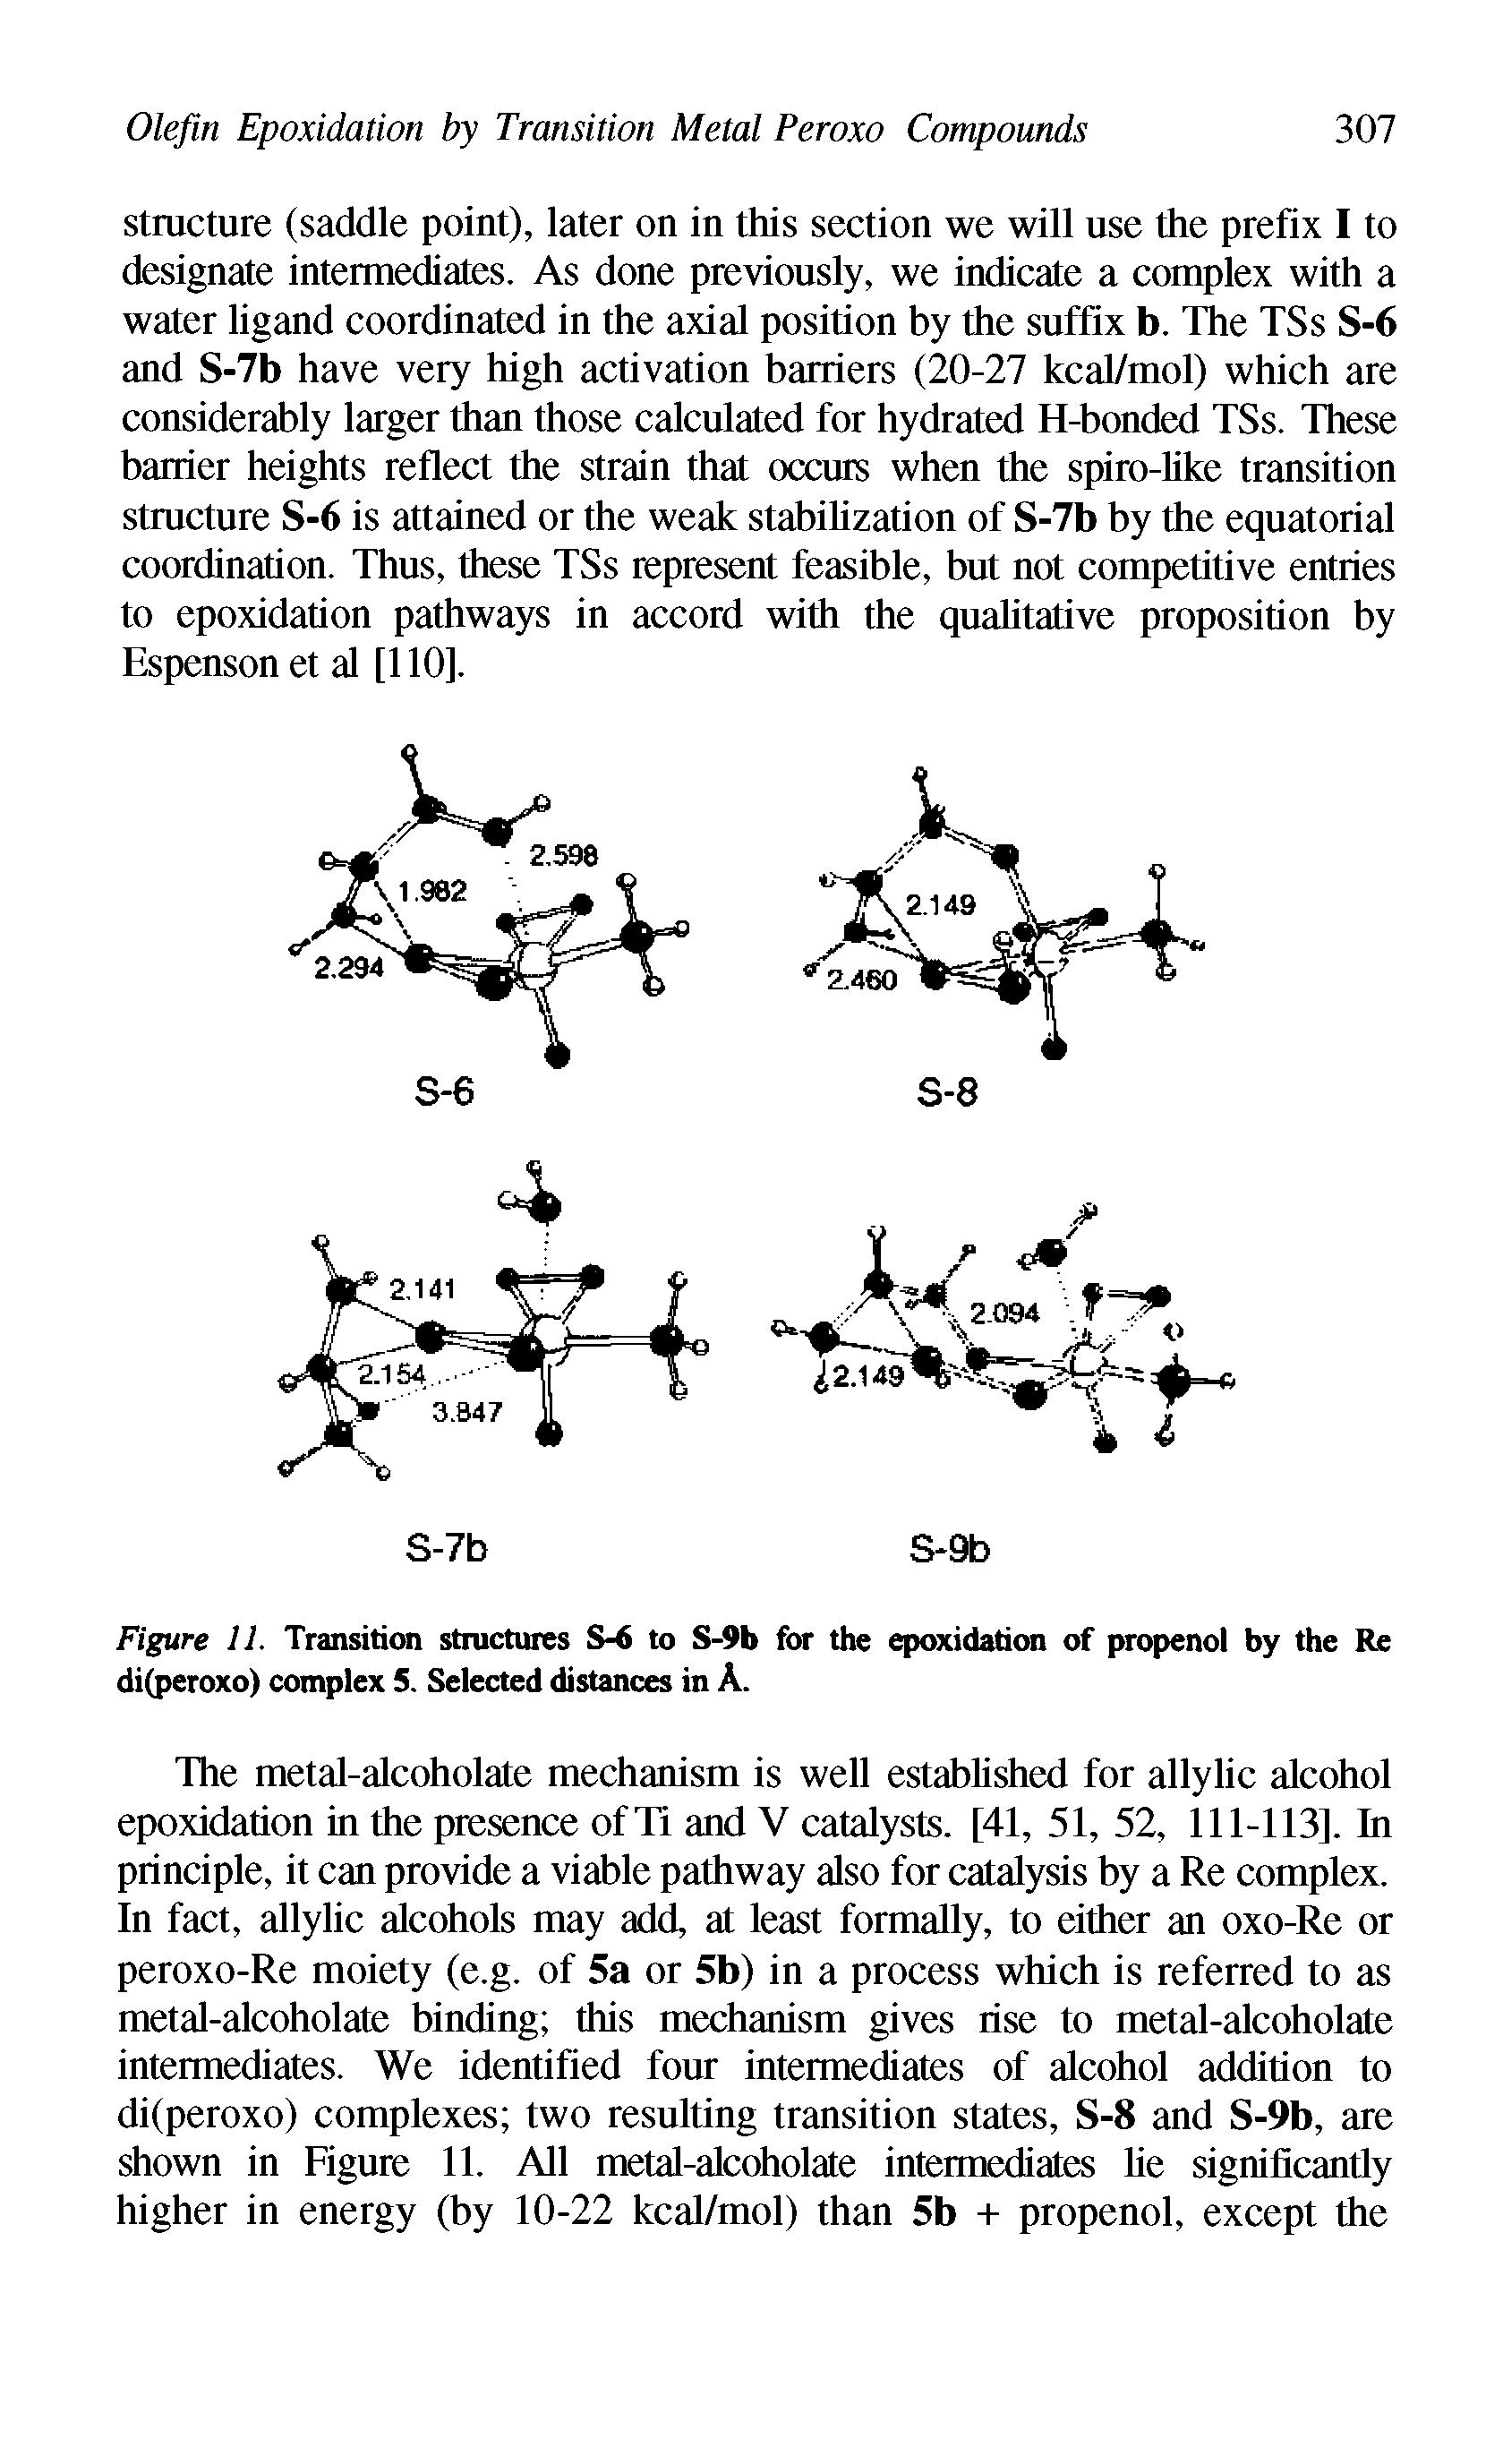 Figure 11. Transition structures S-6 to S-9b for the epoxidation of propenol by the Re di(peroxo) complex 5. Selected distances in A.